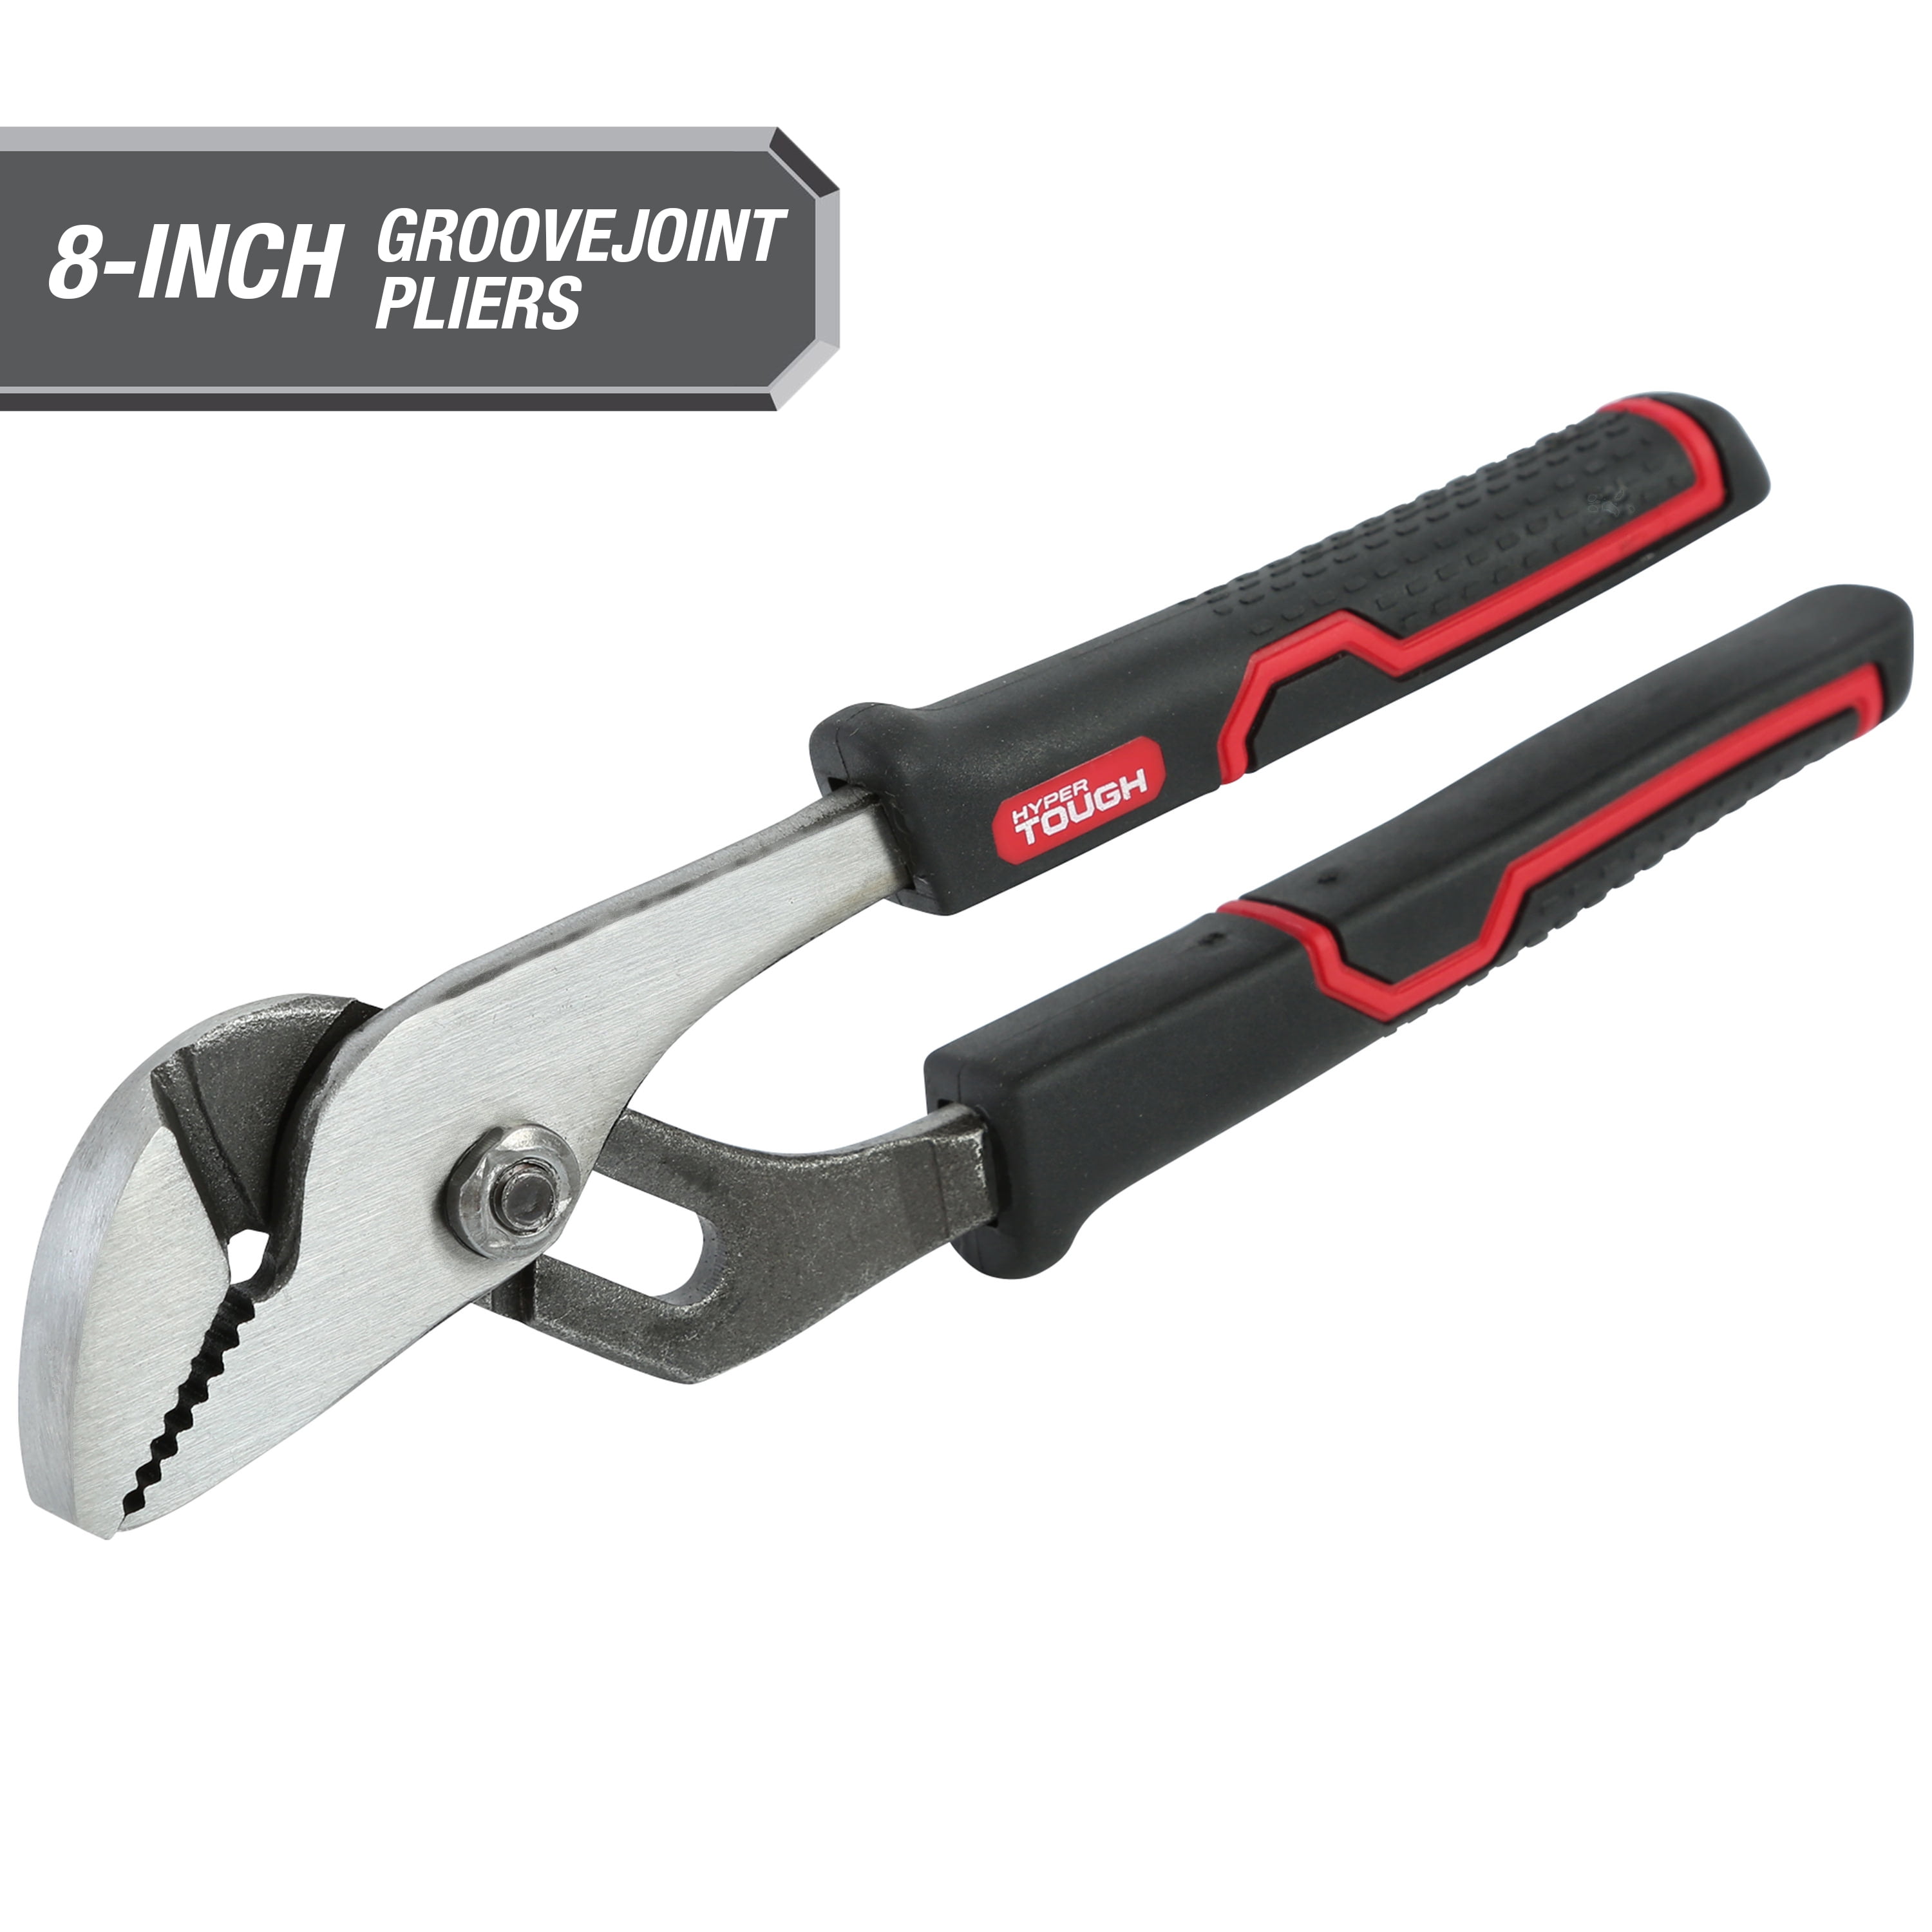 Hyper Tough 8-inch Groove Joint Pliers with Ergonomic Comfort Grips, Black